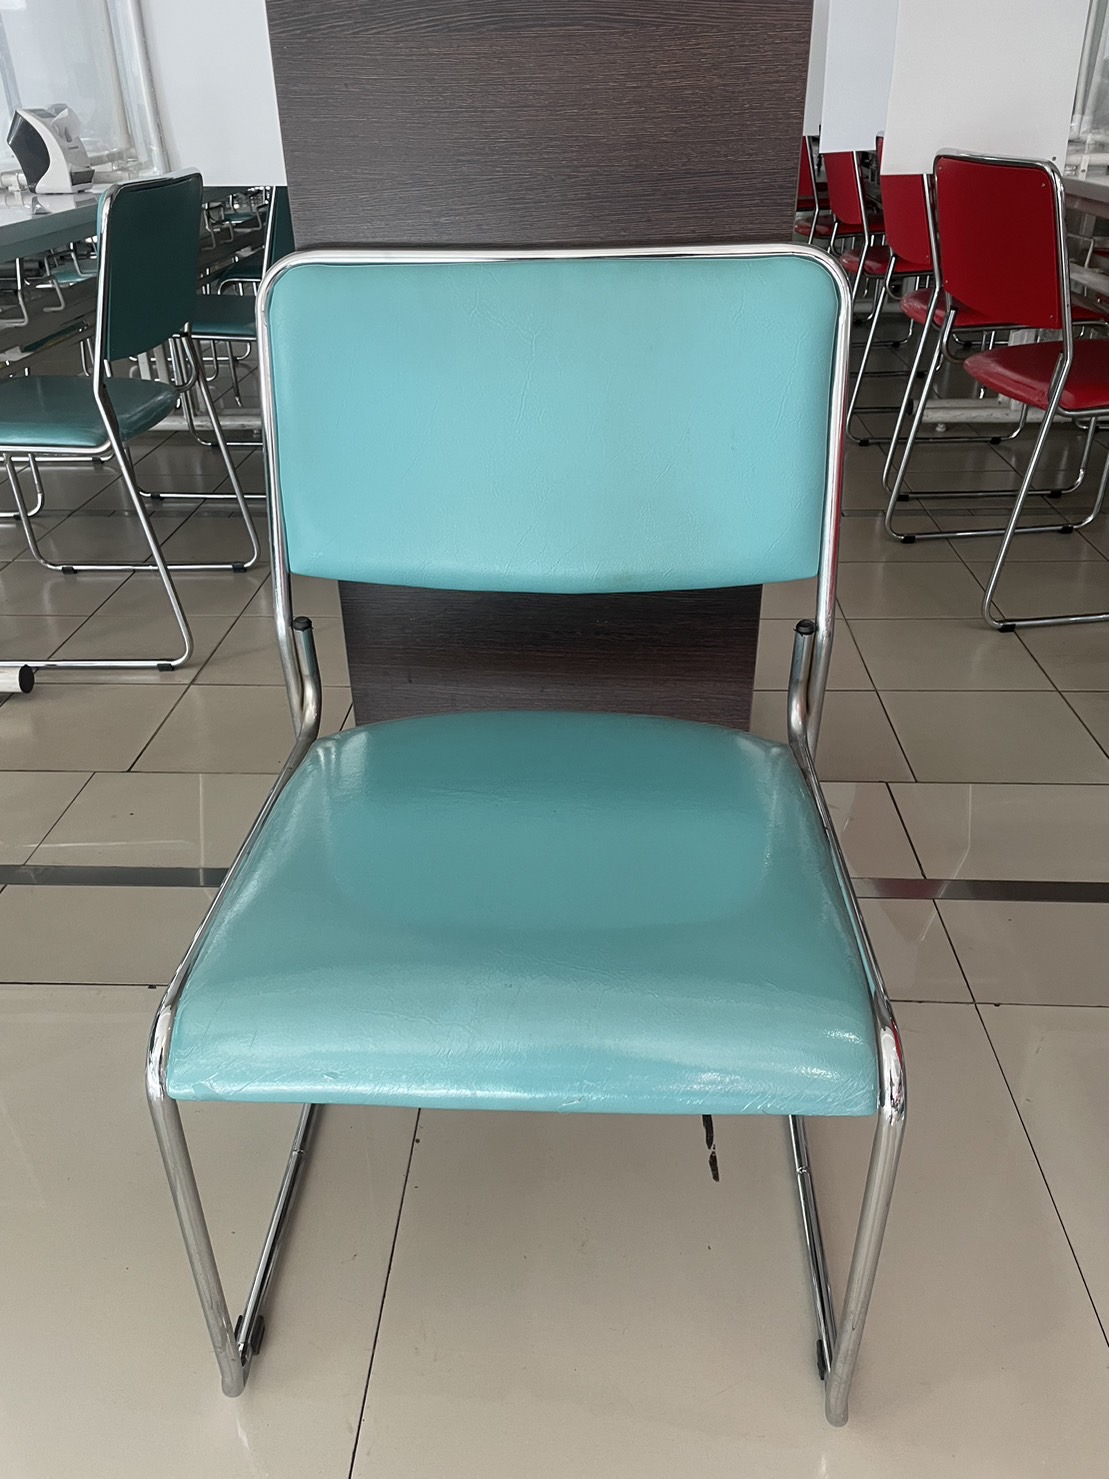 58022::VC-830::A VC modern chair with PVC leather/mesh fabric seat and chrome base. Dimension (WxDxH) cm : 46x53x78 